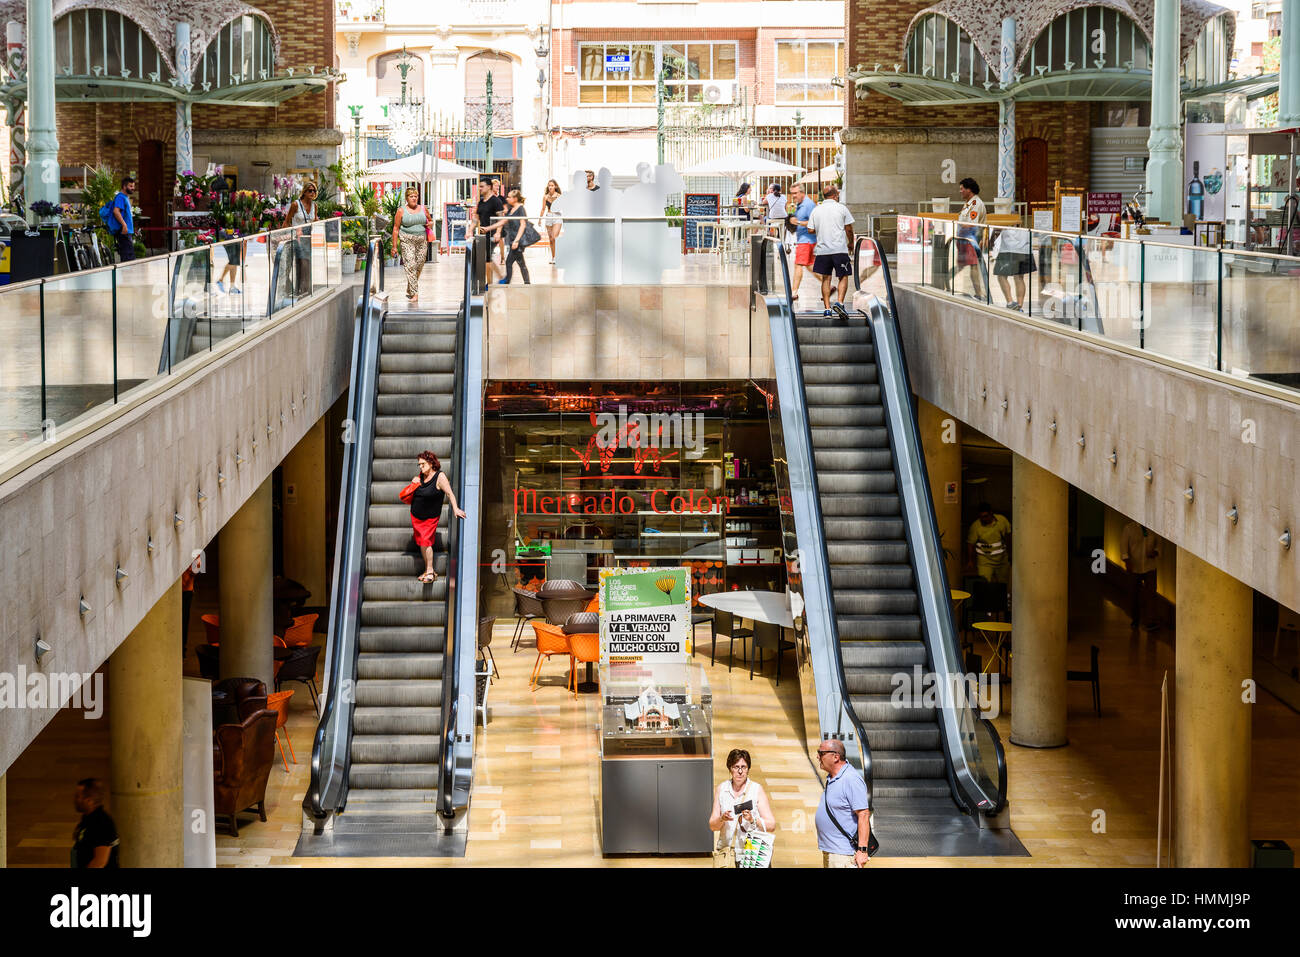 VALENCIA, SPAIN - JULY 27, 2016: From 1916 Mercado Colon is an old market located in the city of Valencia now rehabilitated and equipped with shops an Stock Photo